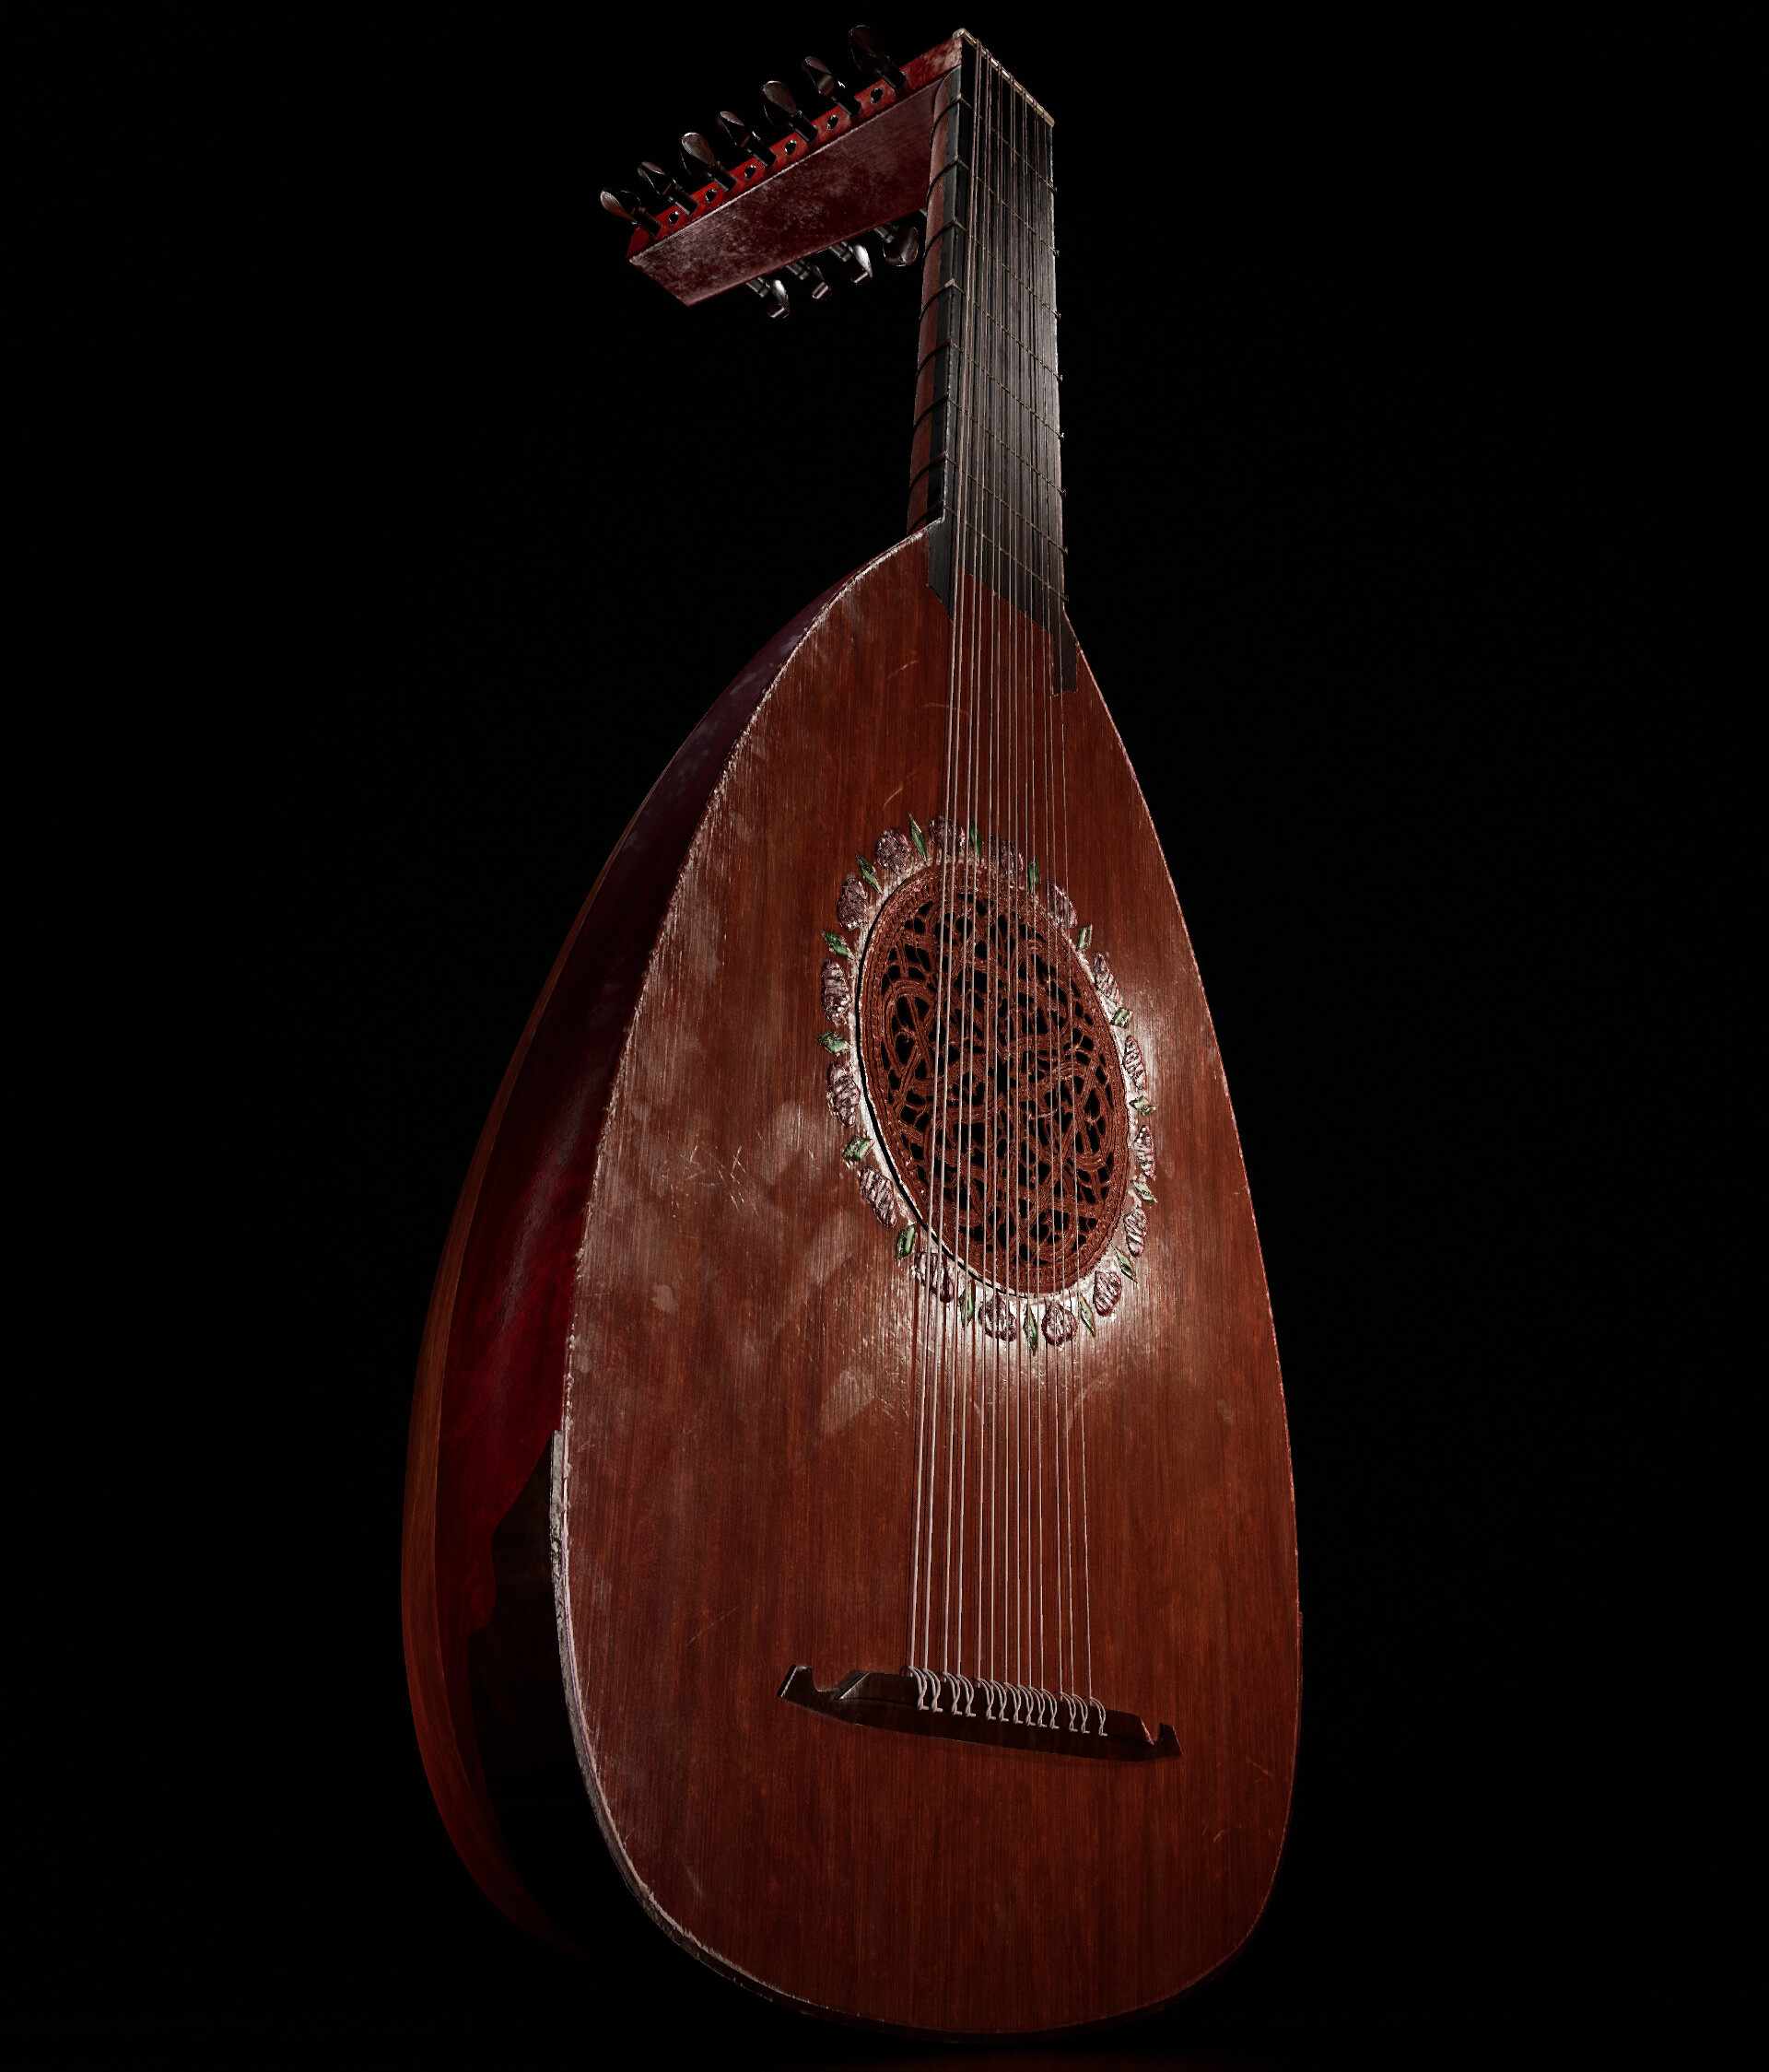 Lute: Masterful 3D-Model, Antique Minstrel's Instrument, The Textures Of Dark Polished Wood. 1920x2250 HD Background.